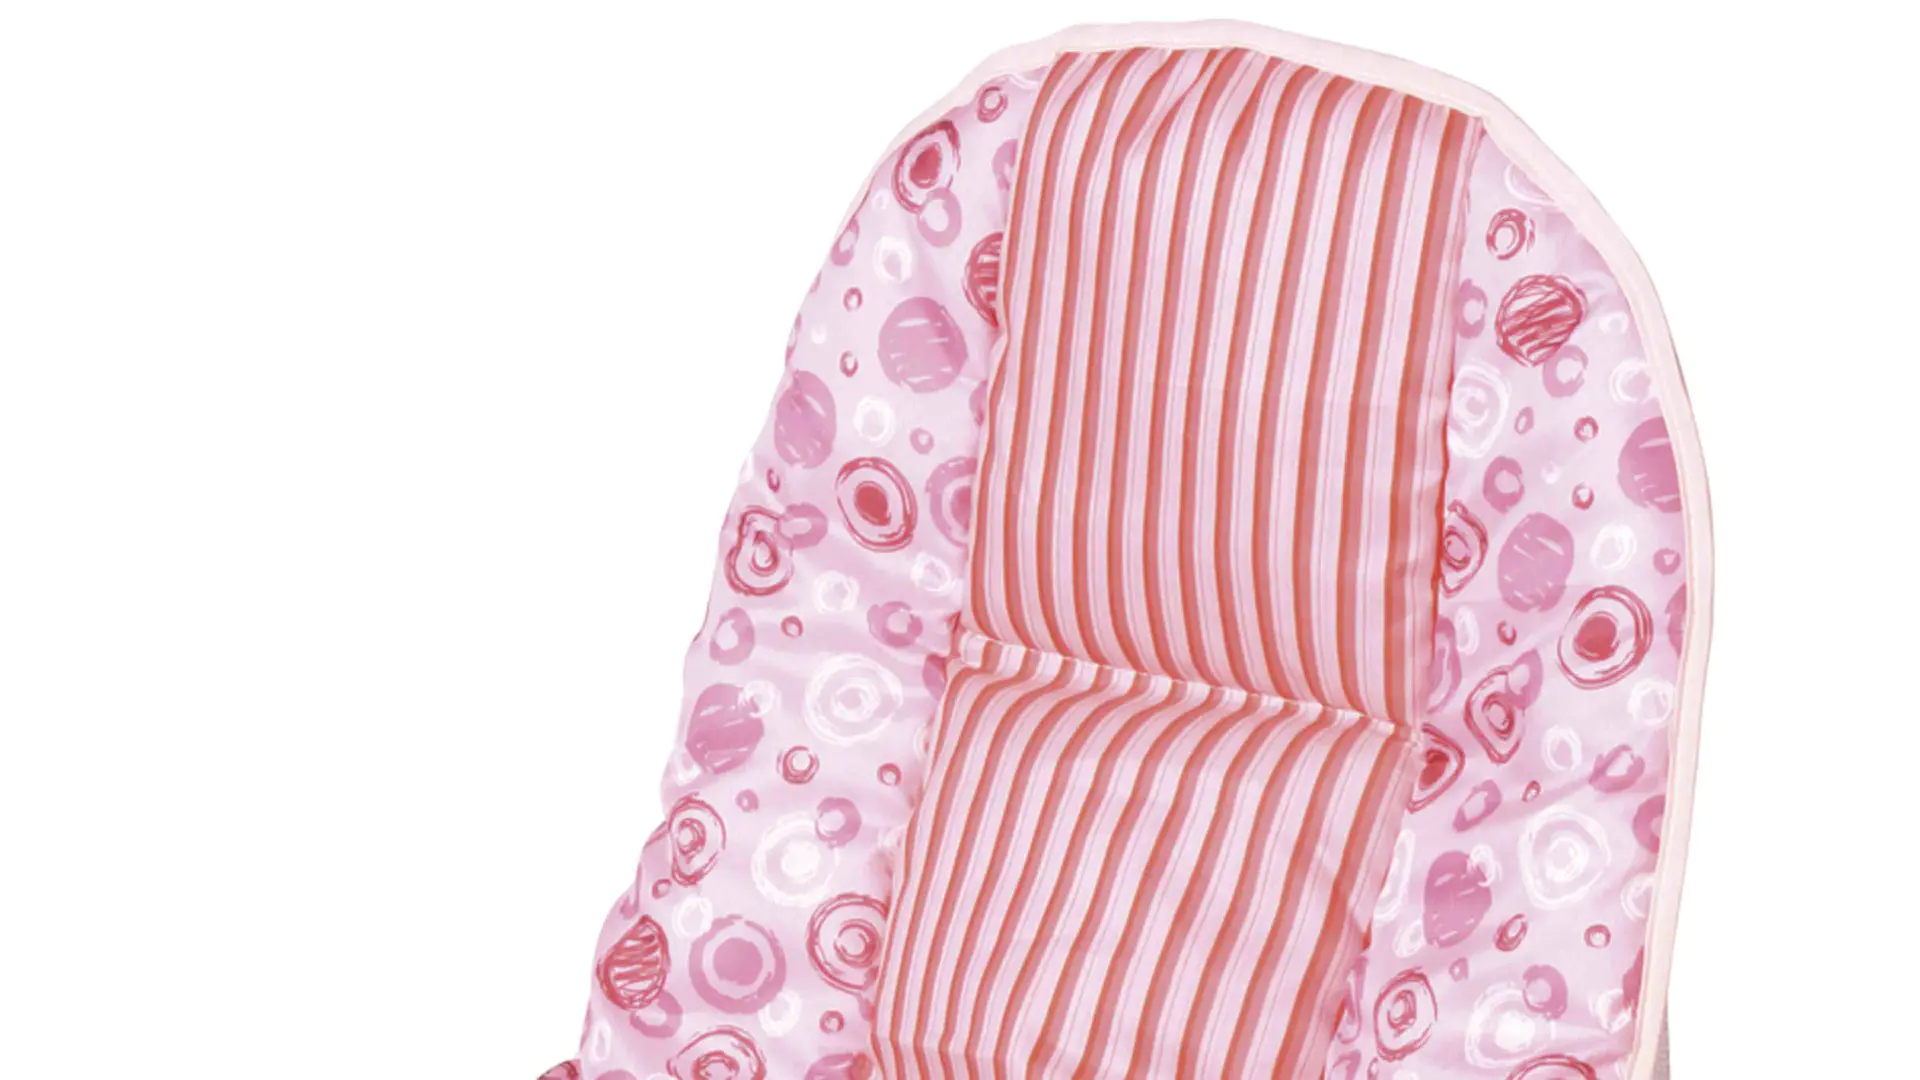 comfortable unisex baby bouncer supplier for bedroom